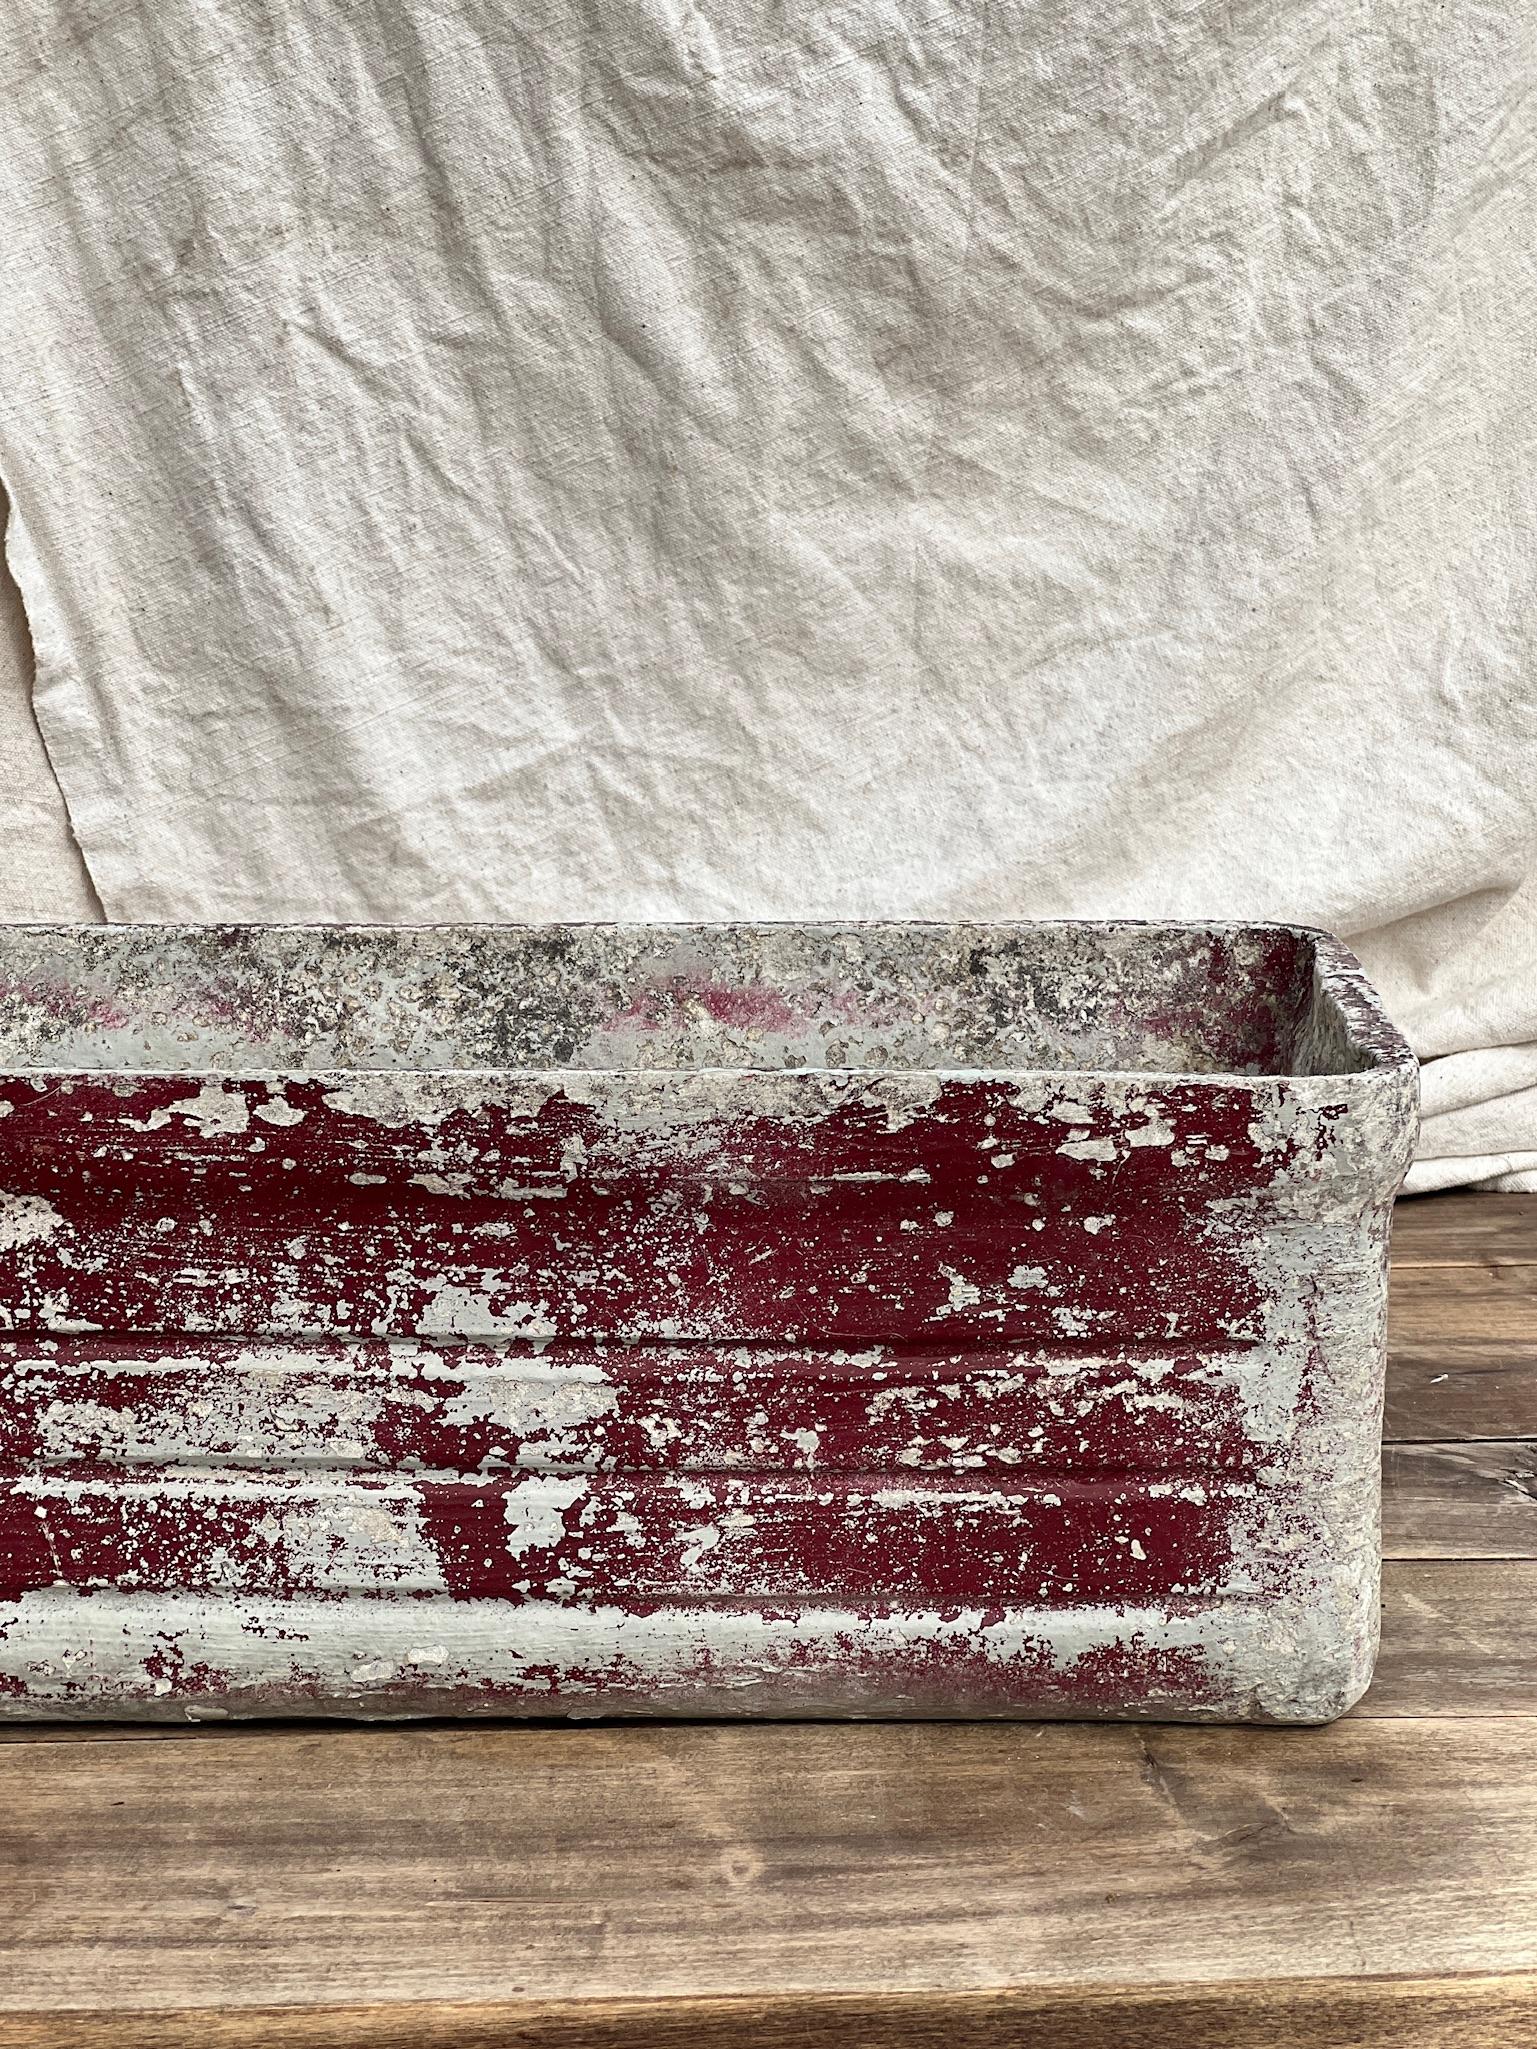 Hand-Crafted 1960s Small Red Willy Guhl Rectangular Concrete Planter For Sale